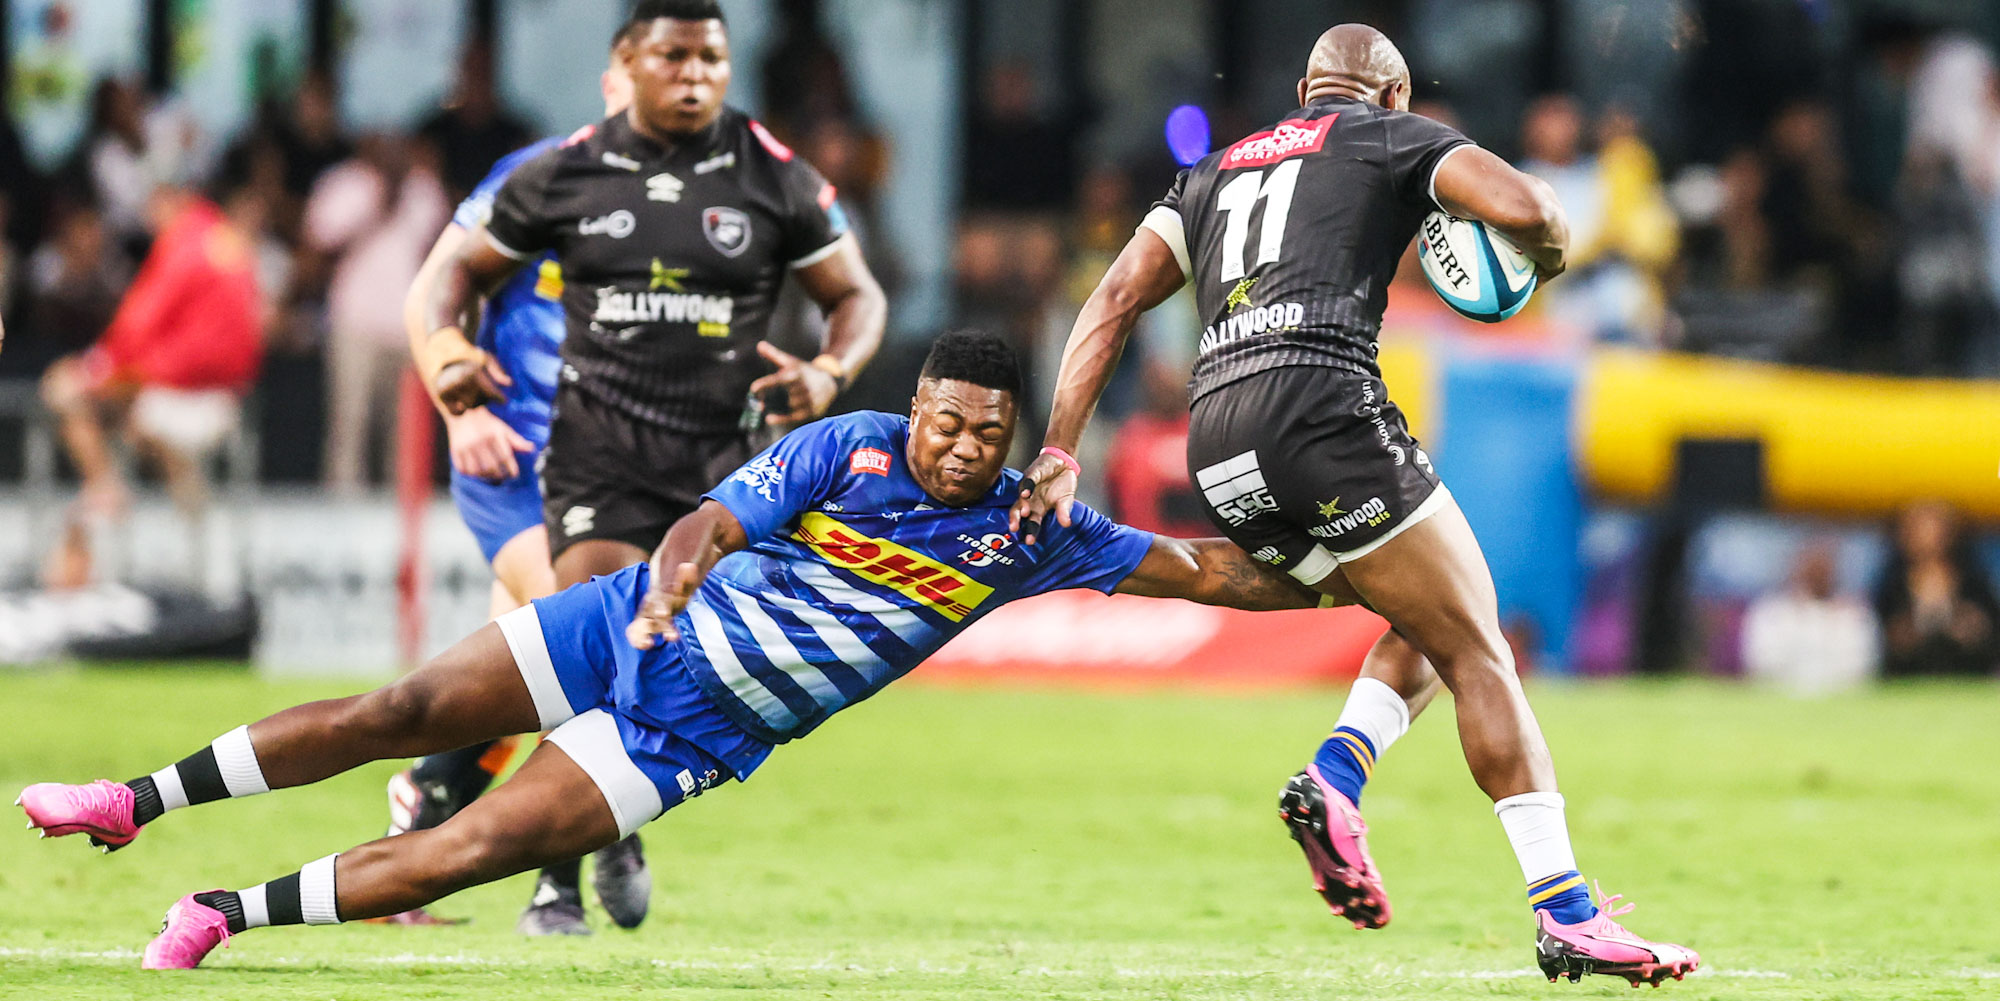 Wandisile Simelane of the DHL Stormers tries to stop Hollywoodbets Sharks speedster Makazole Mapimpi.